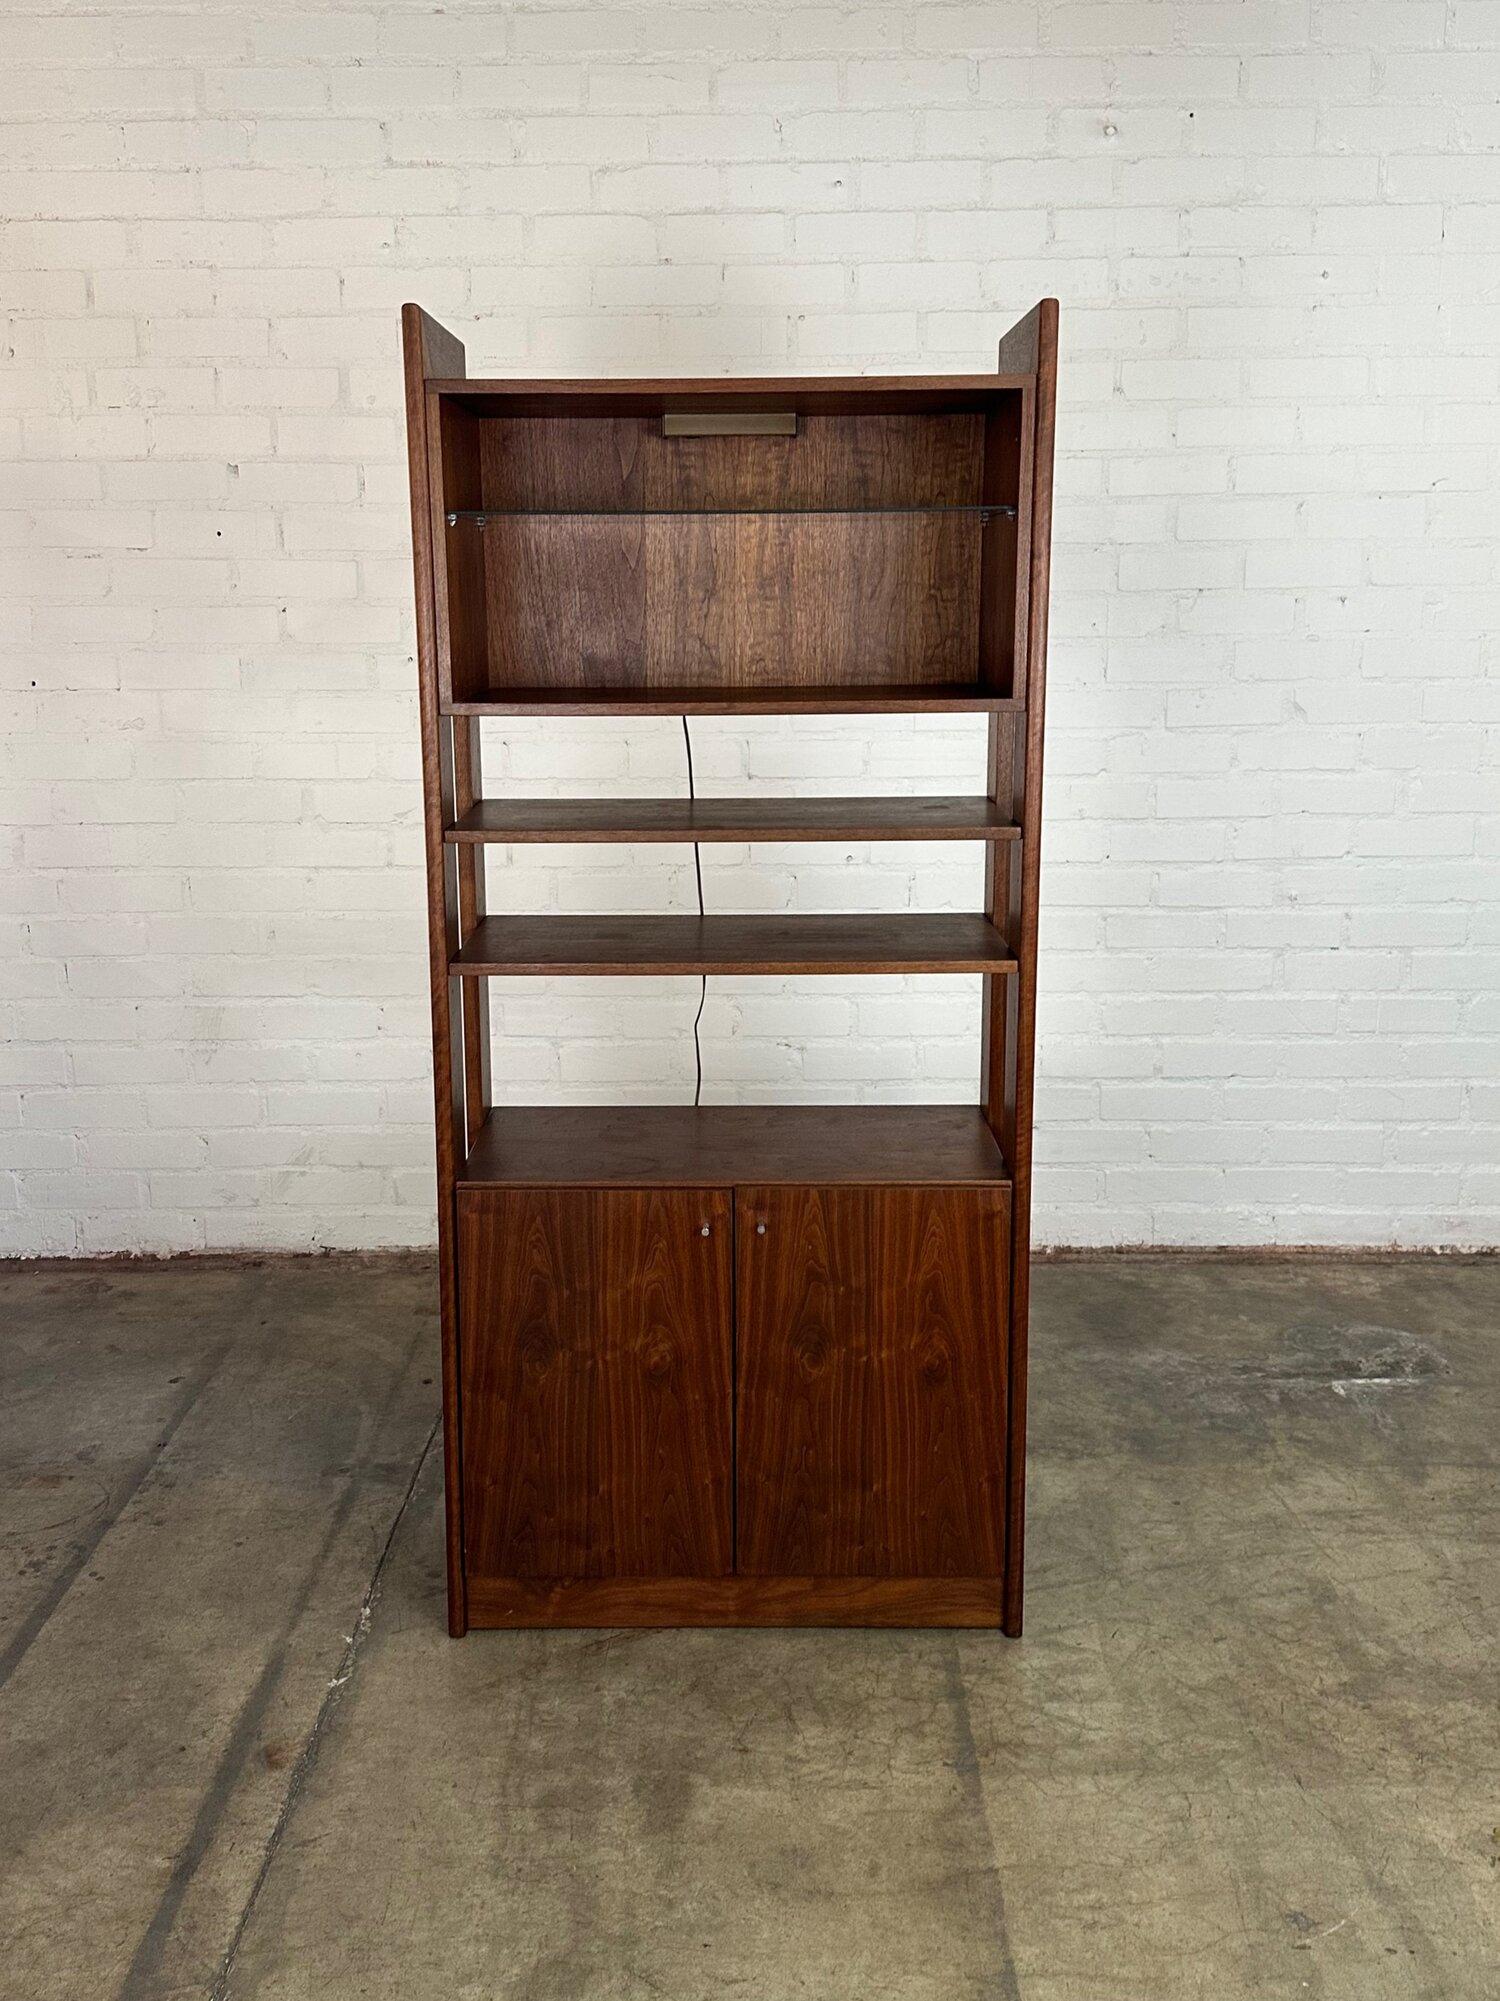 W34 D16 H76

Well preserved walnut free standing bookcase. Item has one fully open compartment with a light on the top portion and one closed portion on the bottom. Shelves are adjustable and removable. Item shows no major areas of wear and is